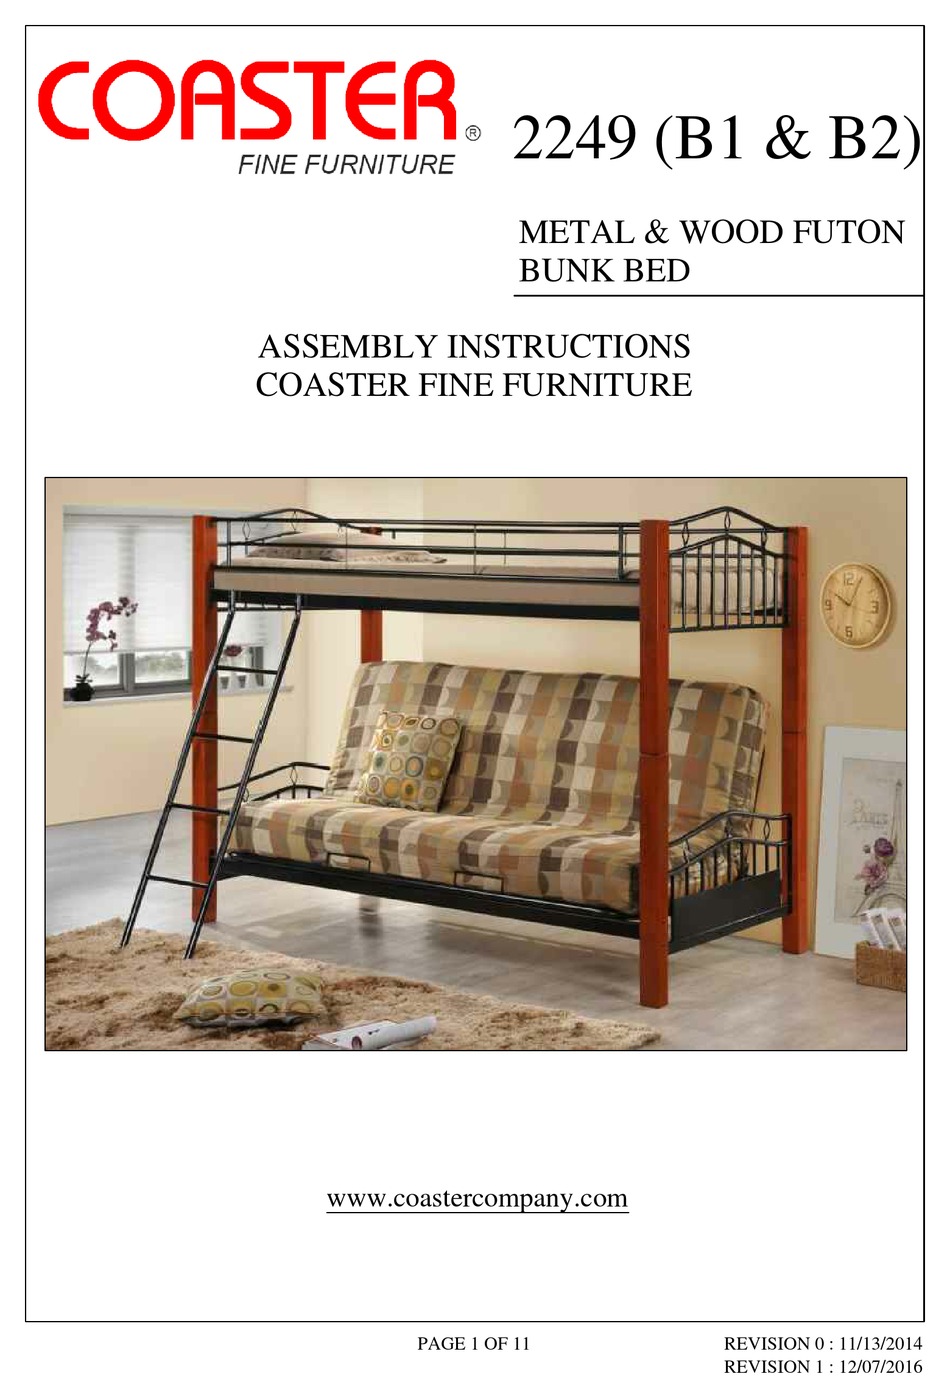 Coaster 2249 Assembly Instructions, Futon Bunk Bed Instructions